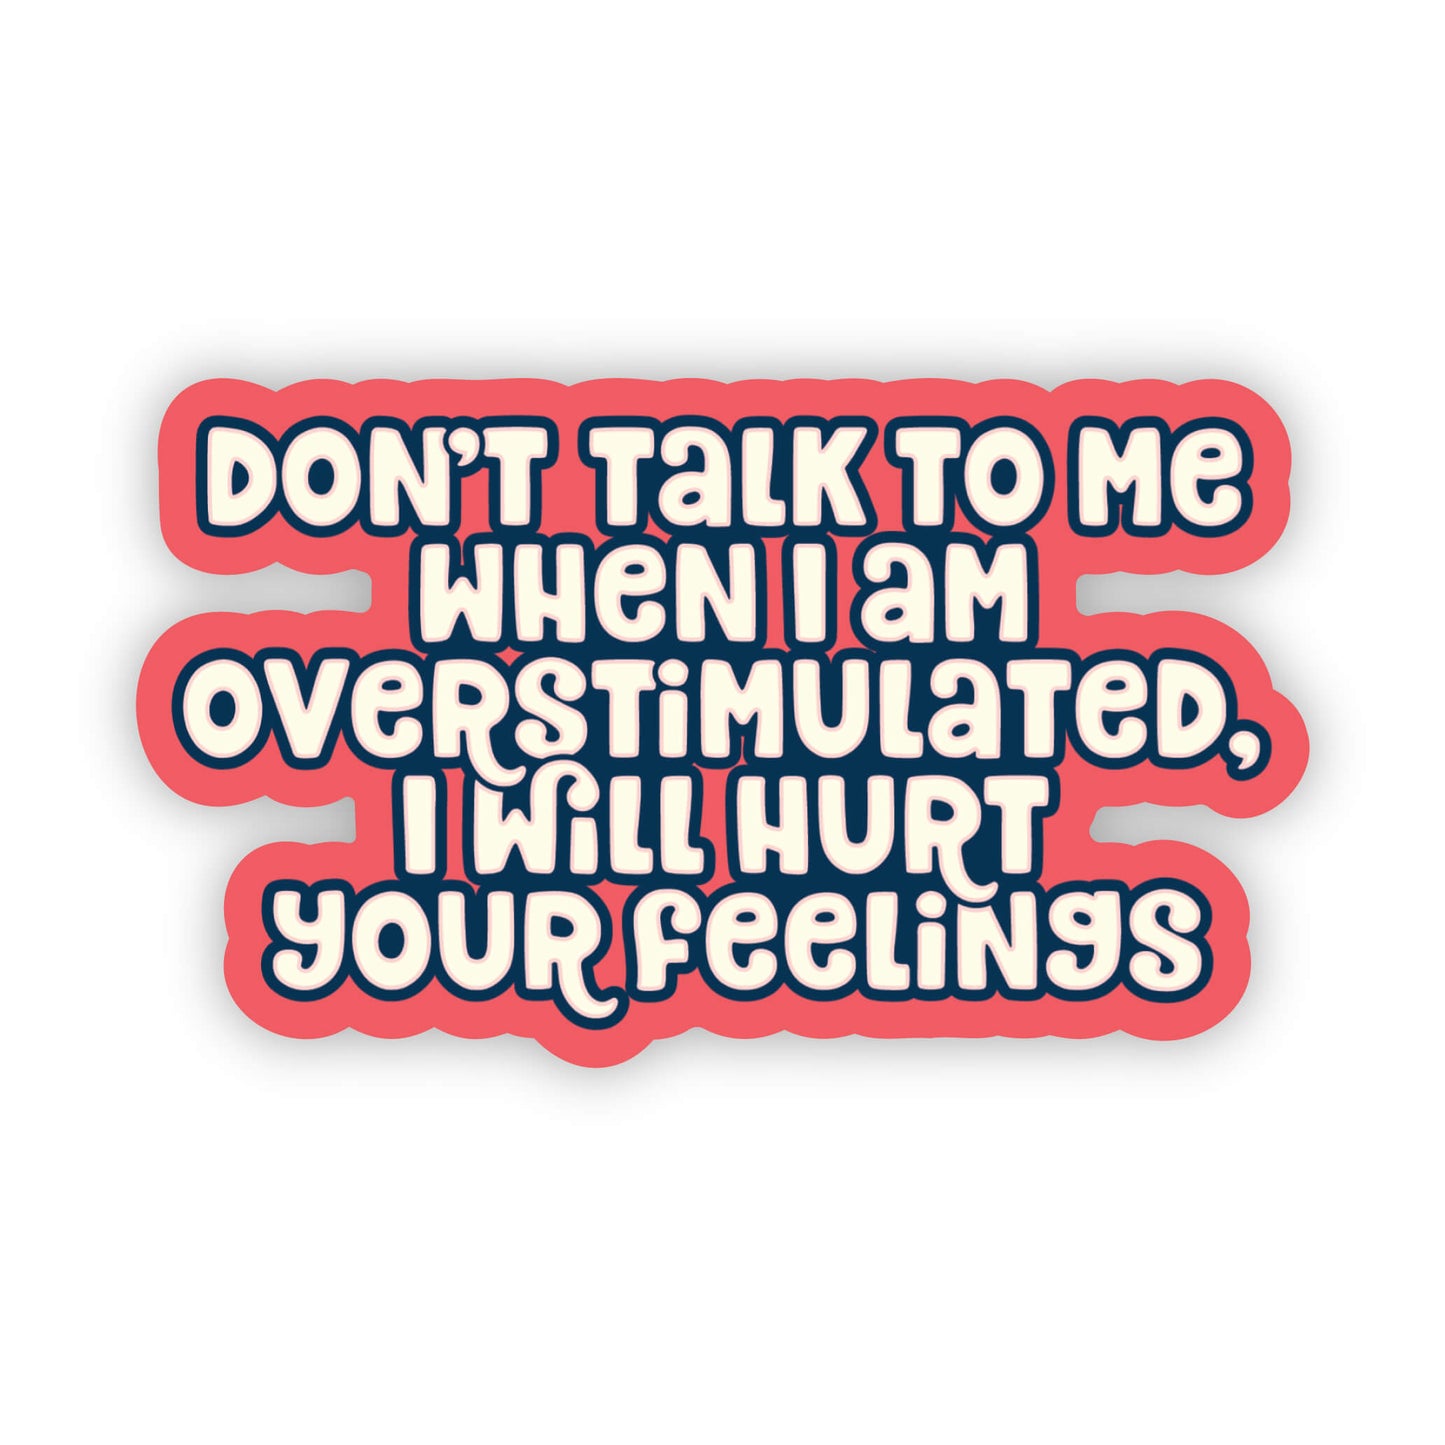 Don't Talk to Me When I am Overstimulated, I Will Hurt Your Feelings Sticker